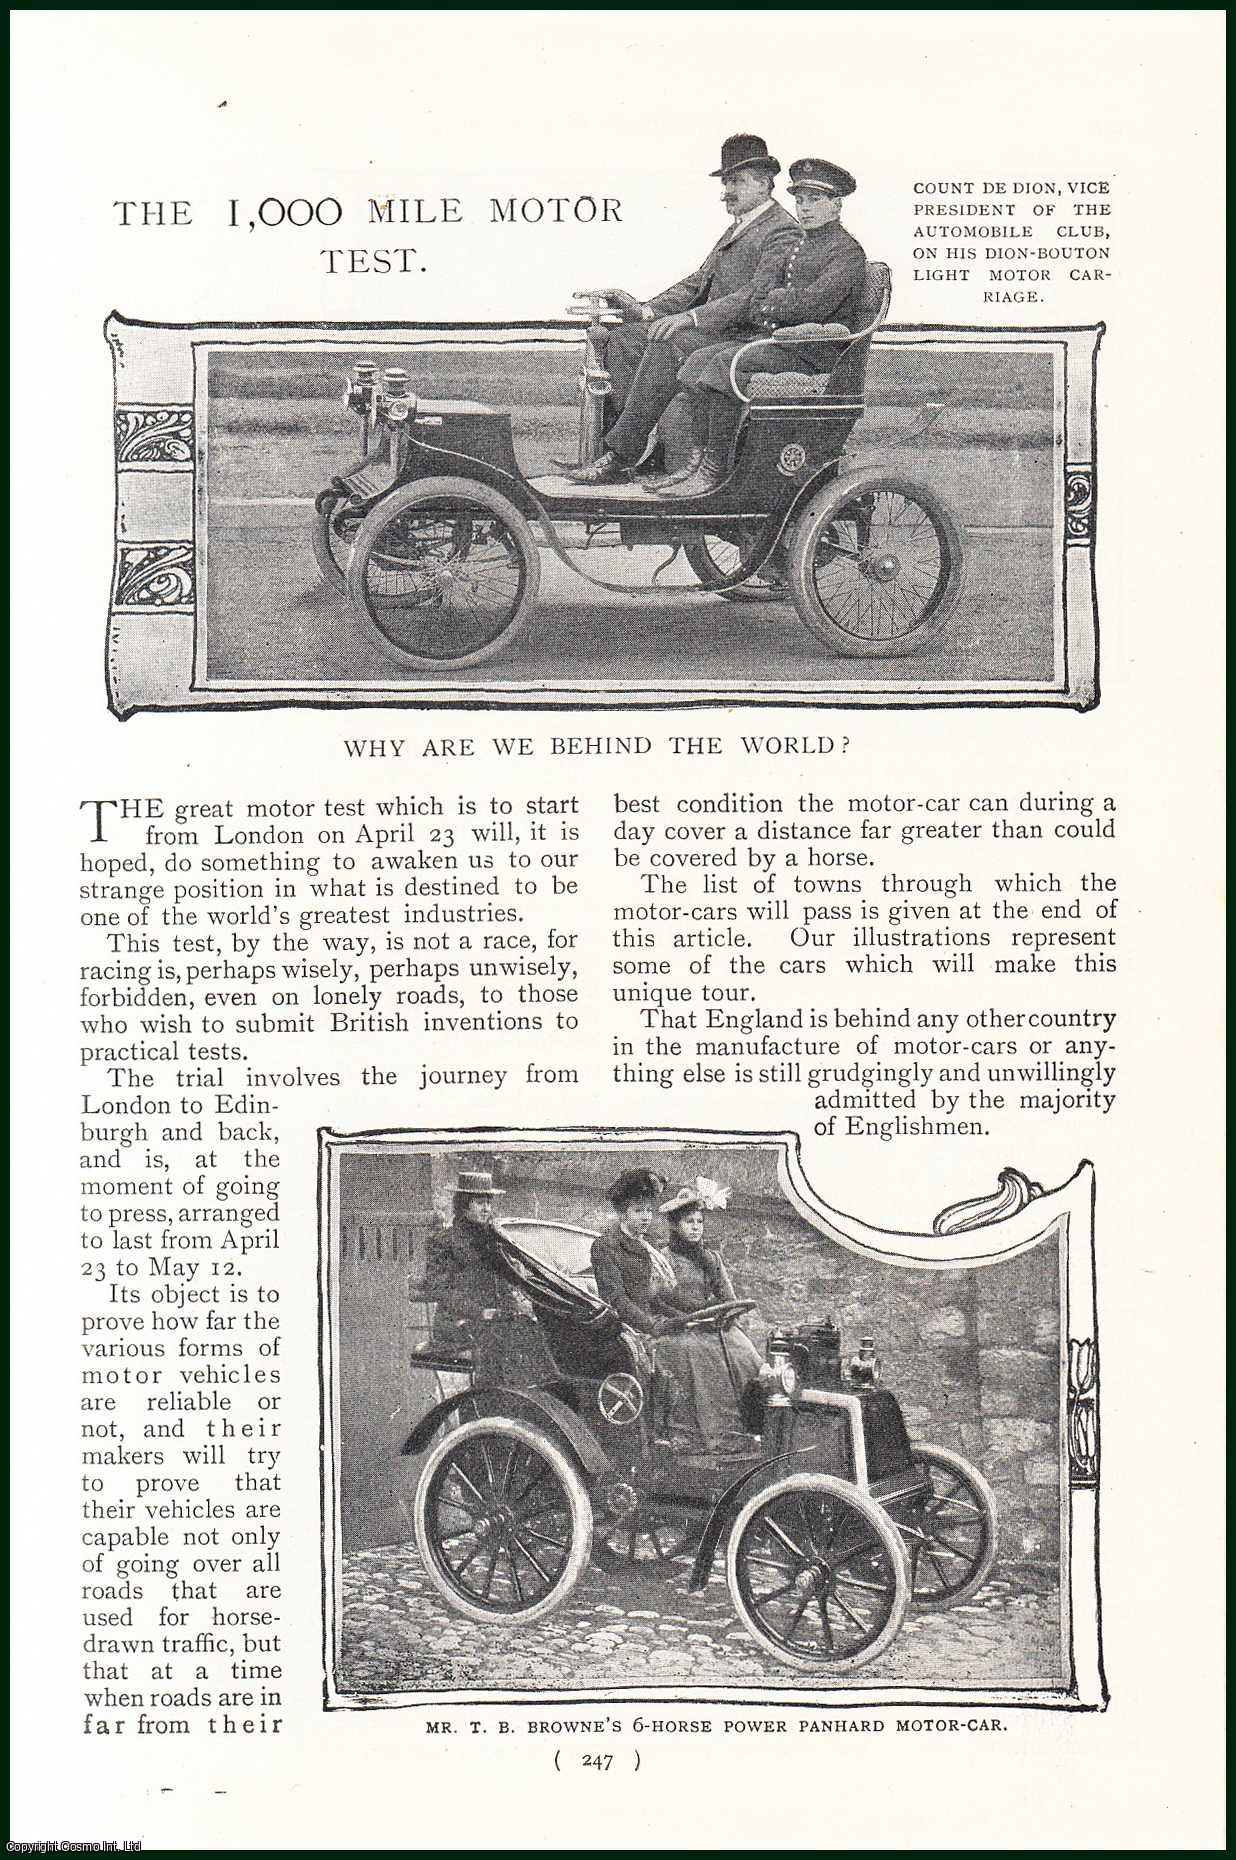 No Author Stated - The 1,000 Mile Motor Test, The London To Edinburgh and Back Test : Why Are We Behind The World. An uncommon original article from the Harmsworth London Magazine, 1901.